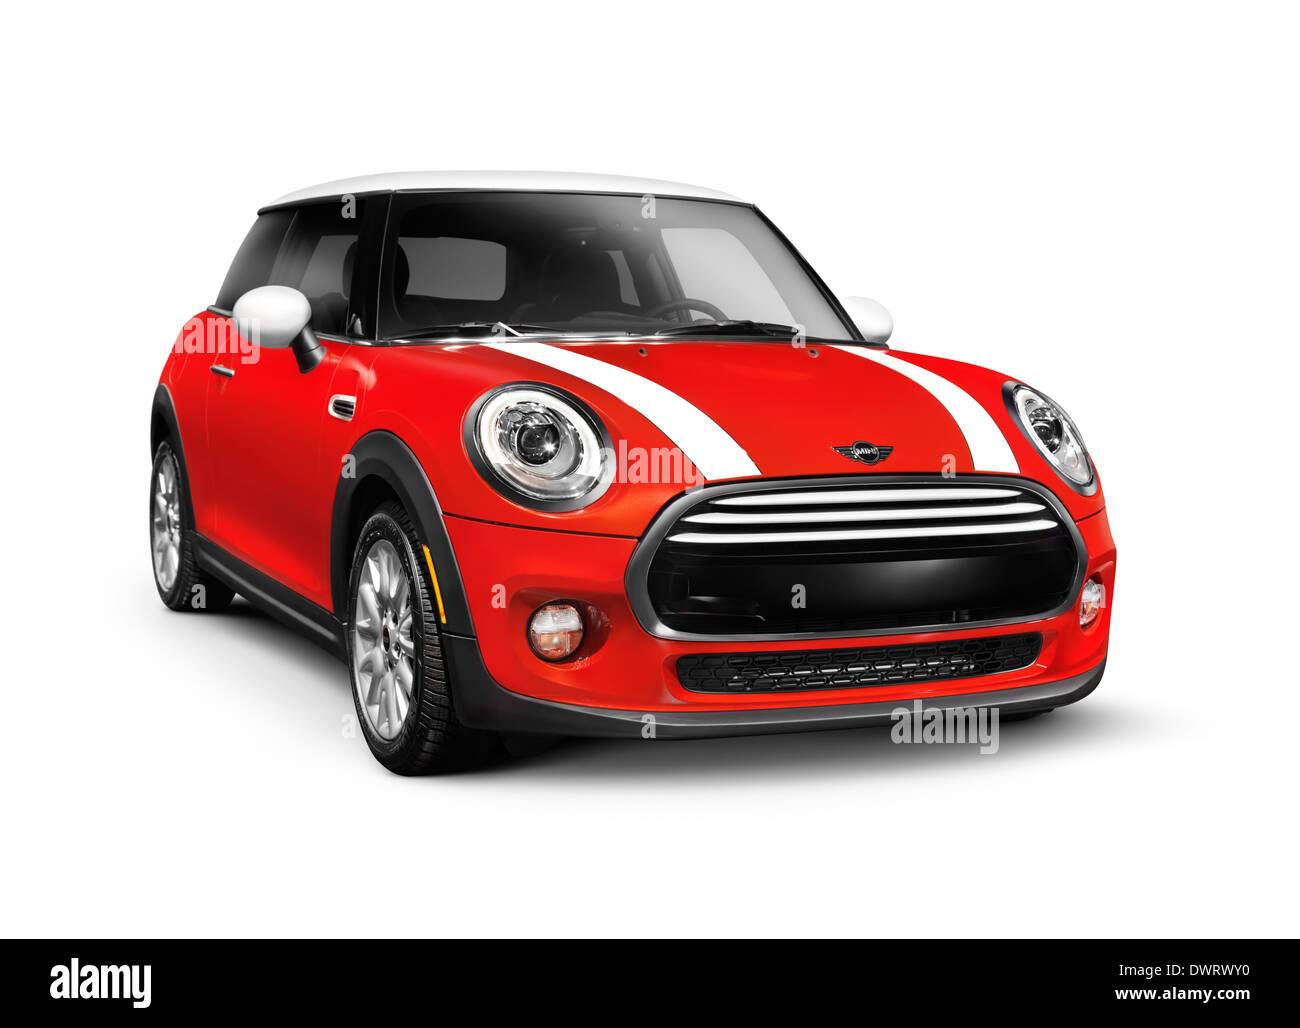 License available at MaximImages.com - Red 2014 Mini Cooper Hardtop compact city car isolated on white background Stock Photo